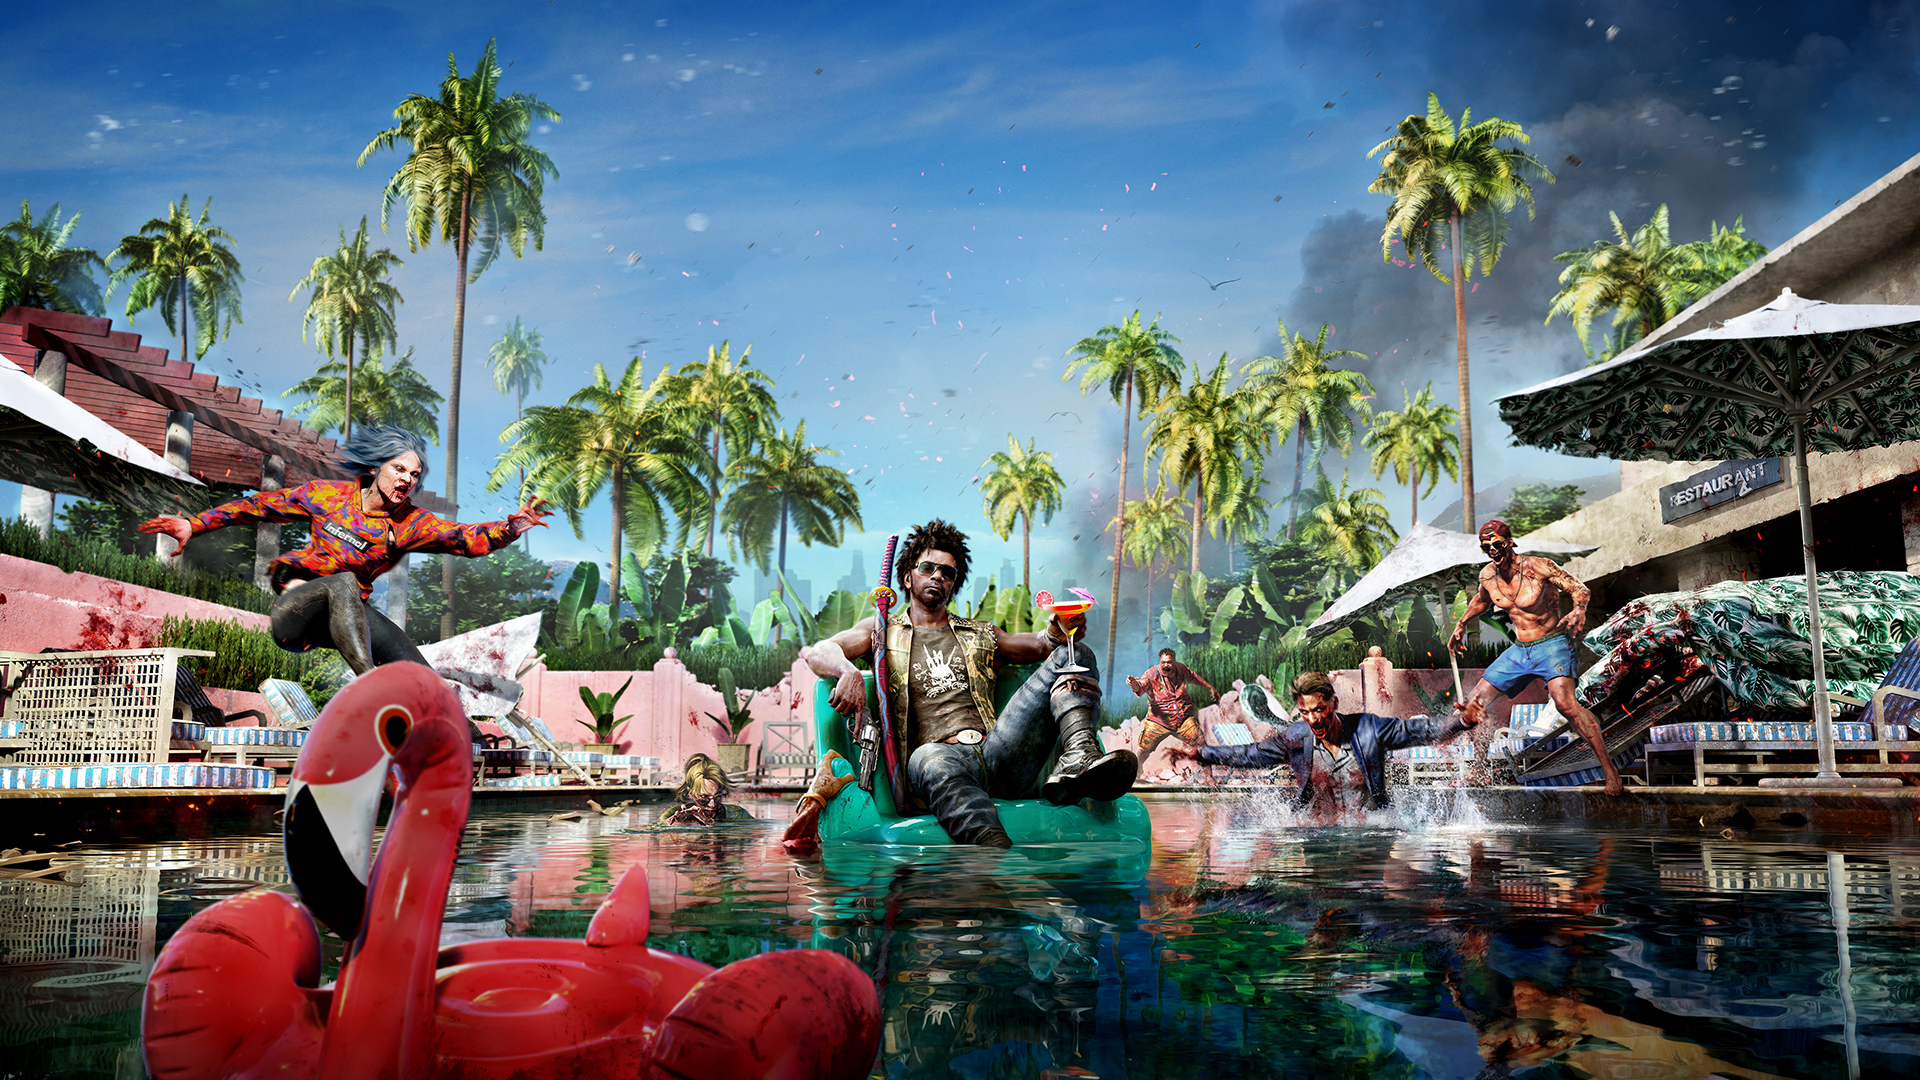 Dead Island 2 - Two new story expansions announced